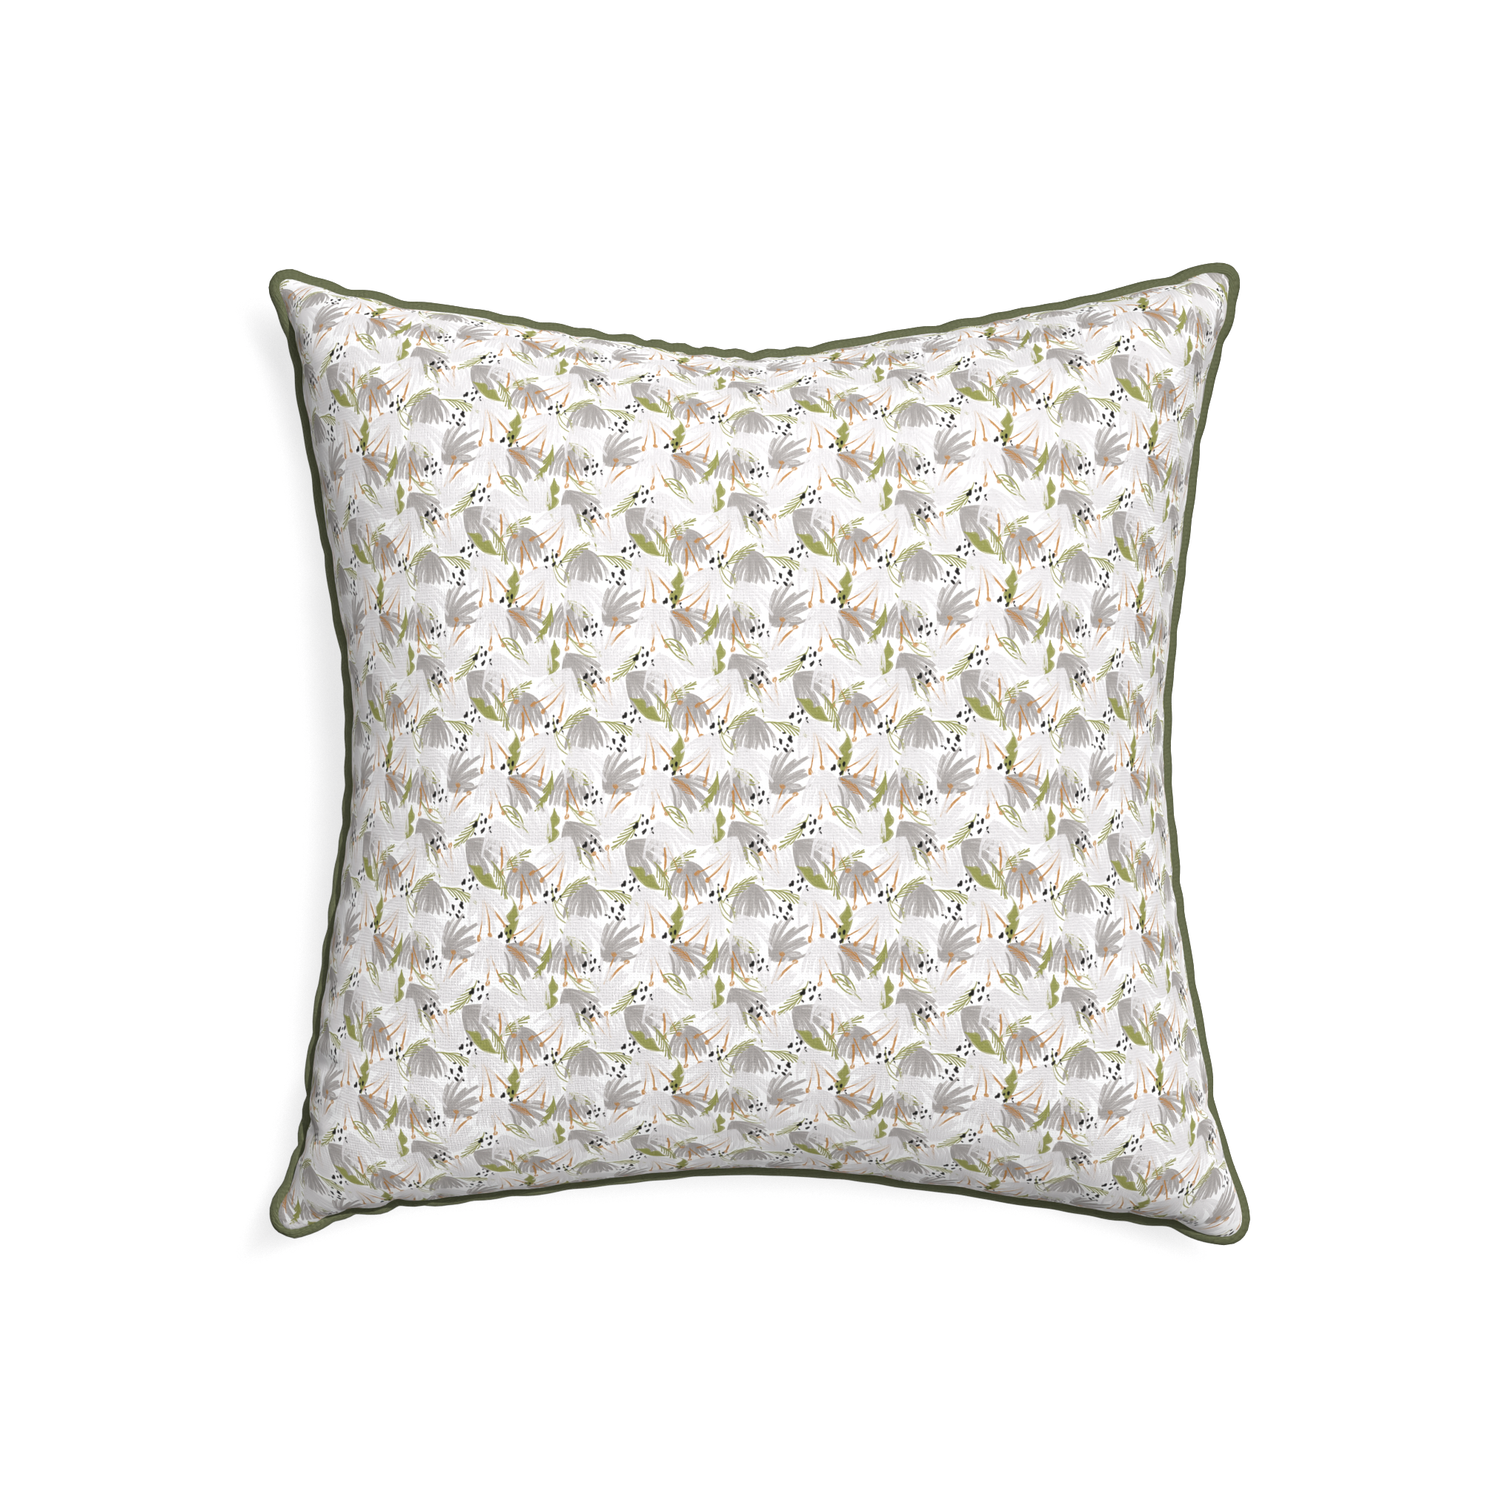 22-square eden grey custom pillow with f piping on white background